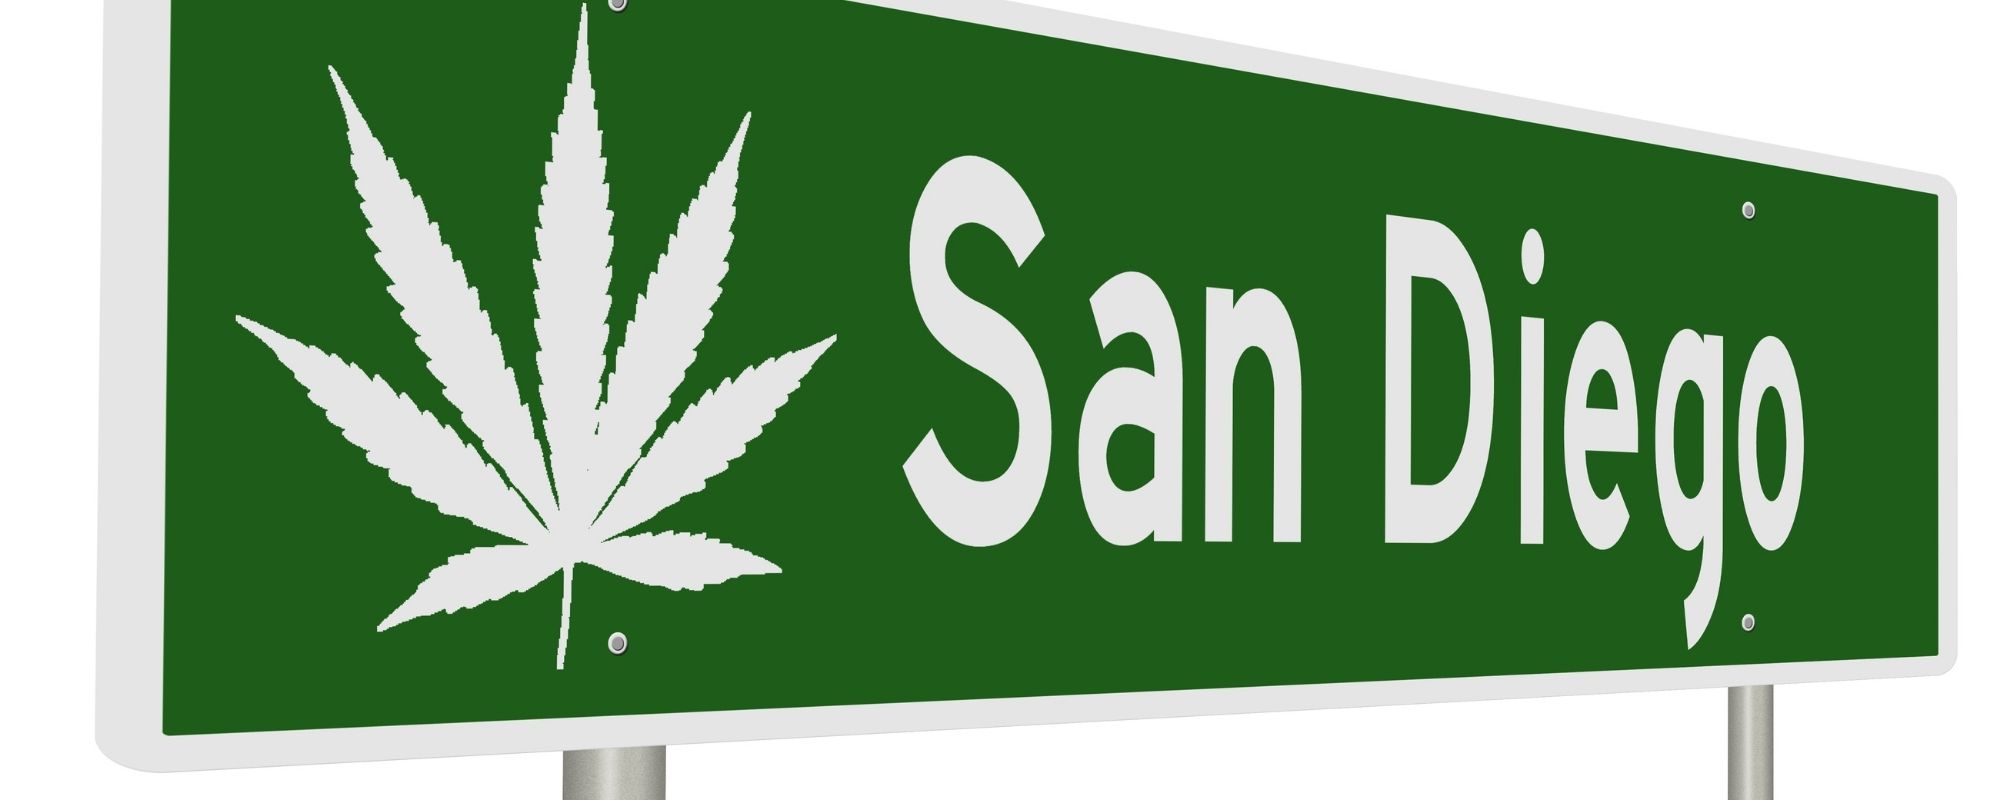 First City-Sanctioned Cannabis Trade Association in the Works in San Diego